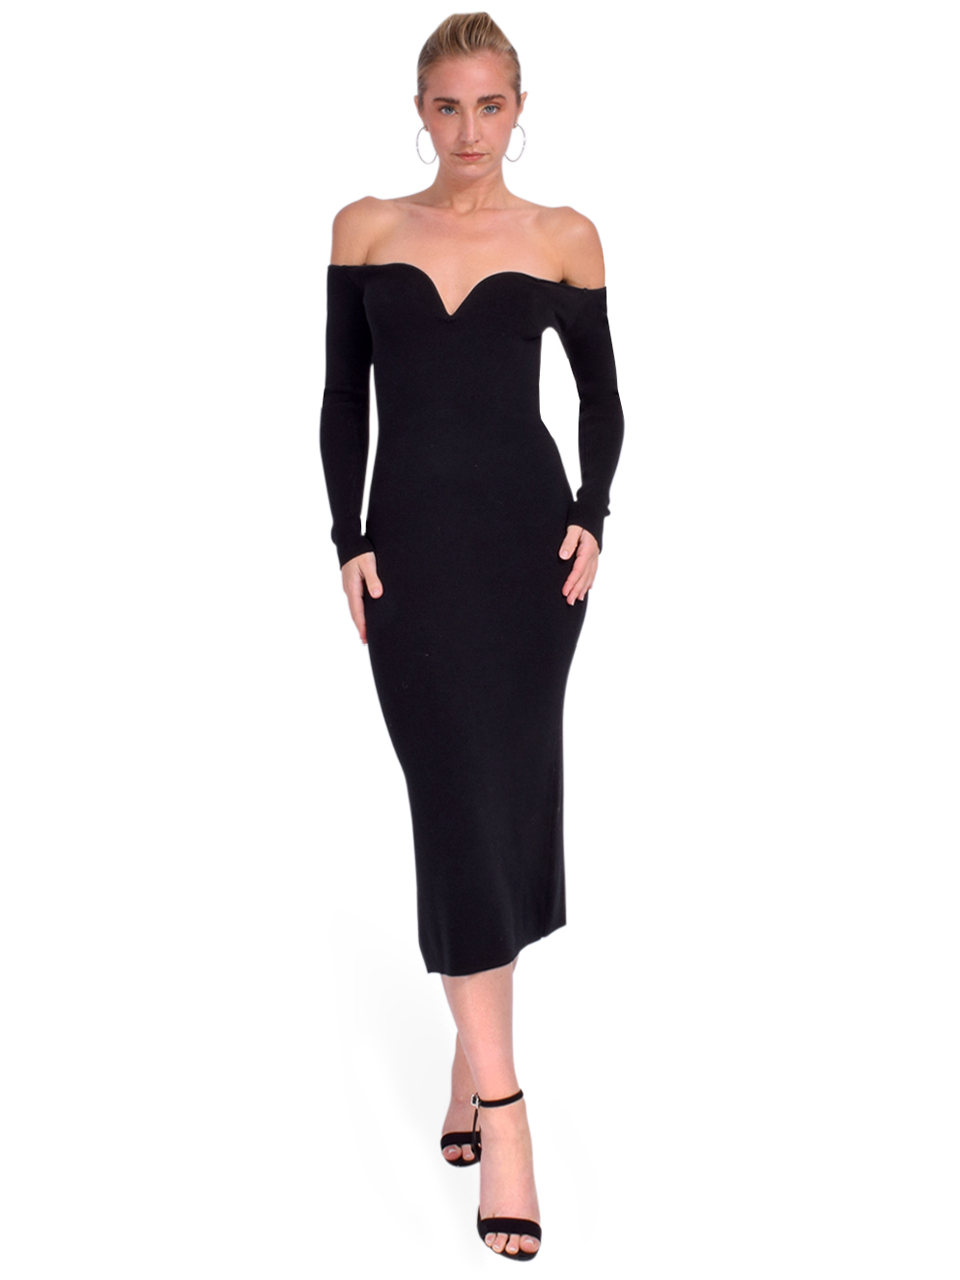 LE SUPERBE I Feel Love Dress in Black Front View 1